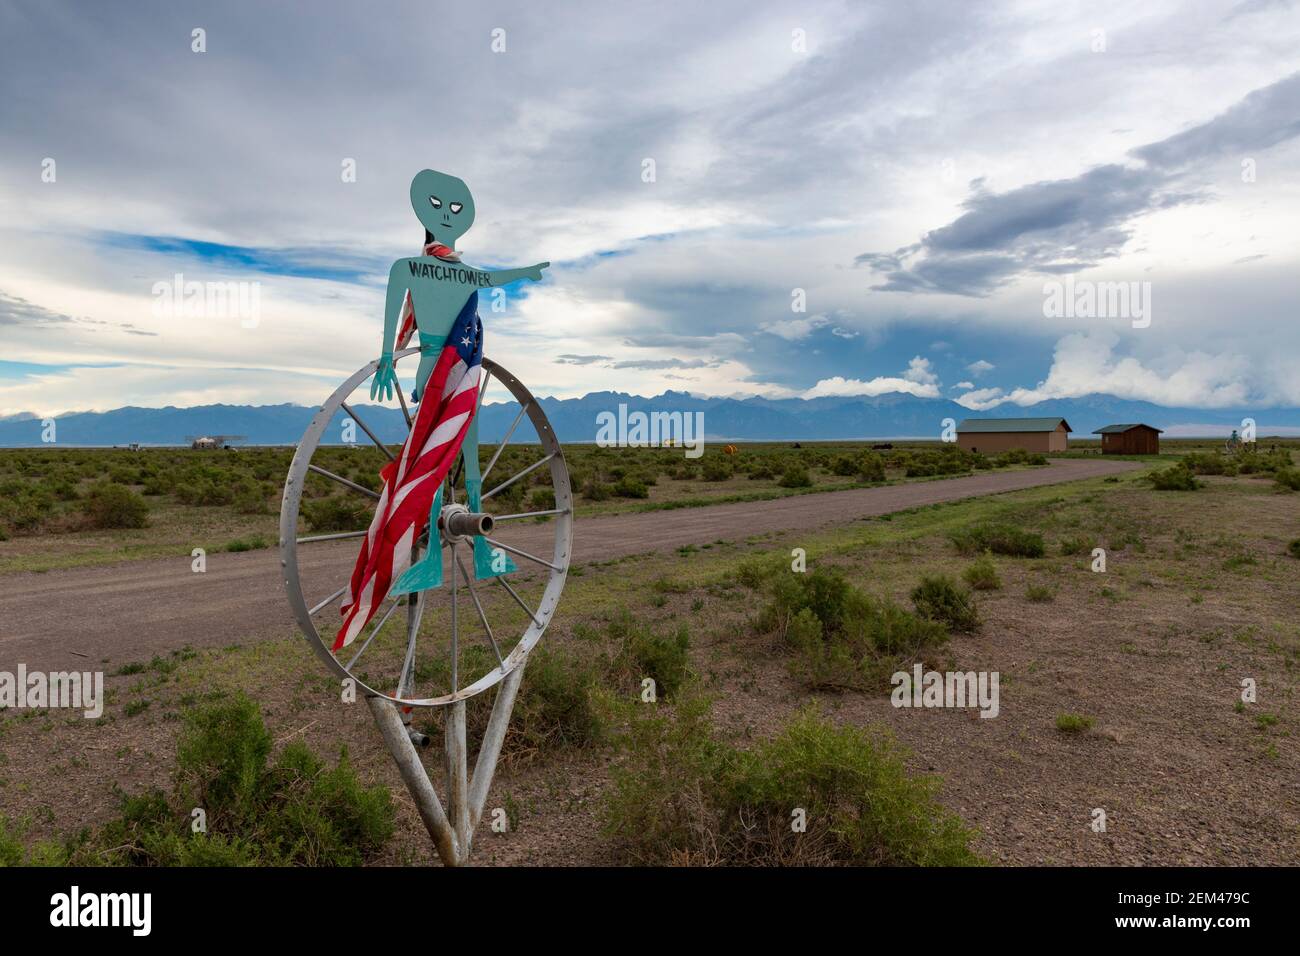 Hooper, Colorado - July 14, 2014: The entrance to the UFO watchtower near town of Hooper, in the state of Colorado, USA. Stock Photo